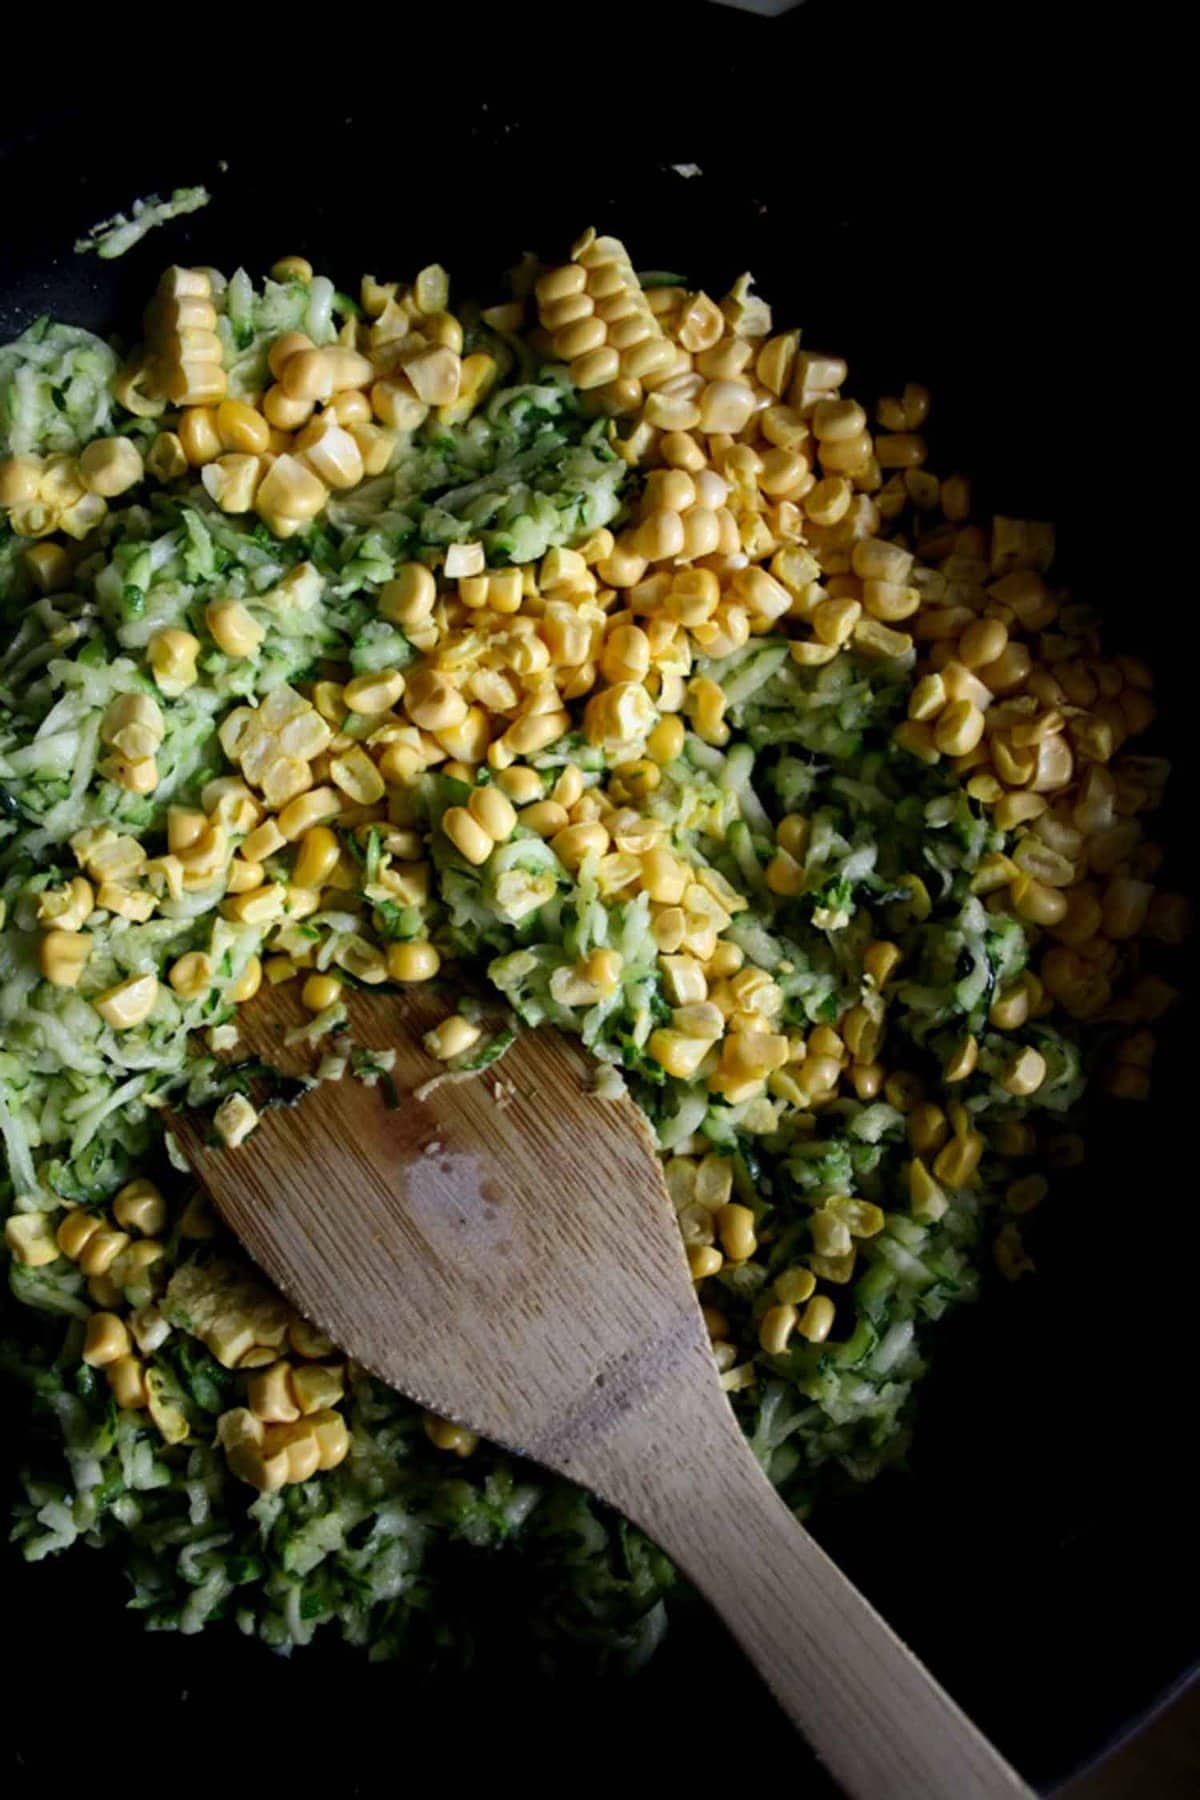 Courgette and sweetcorn tart filling in a skillet with a wooden spatula